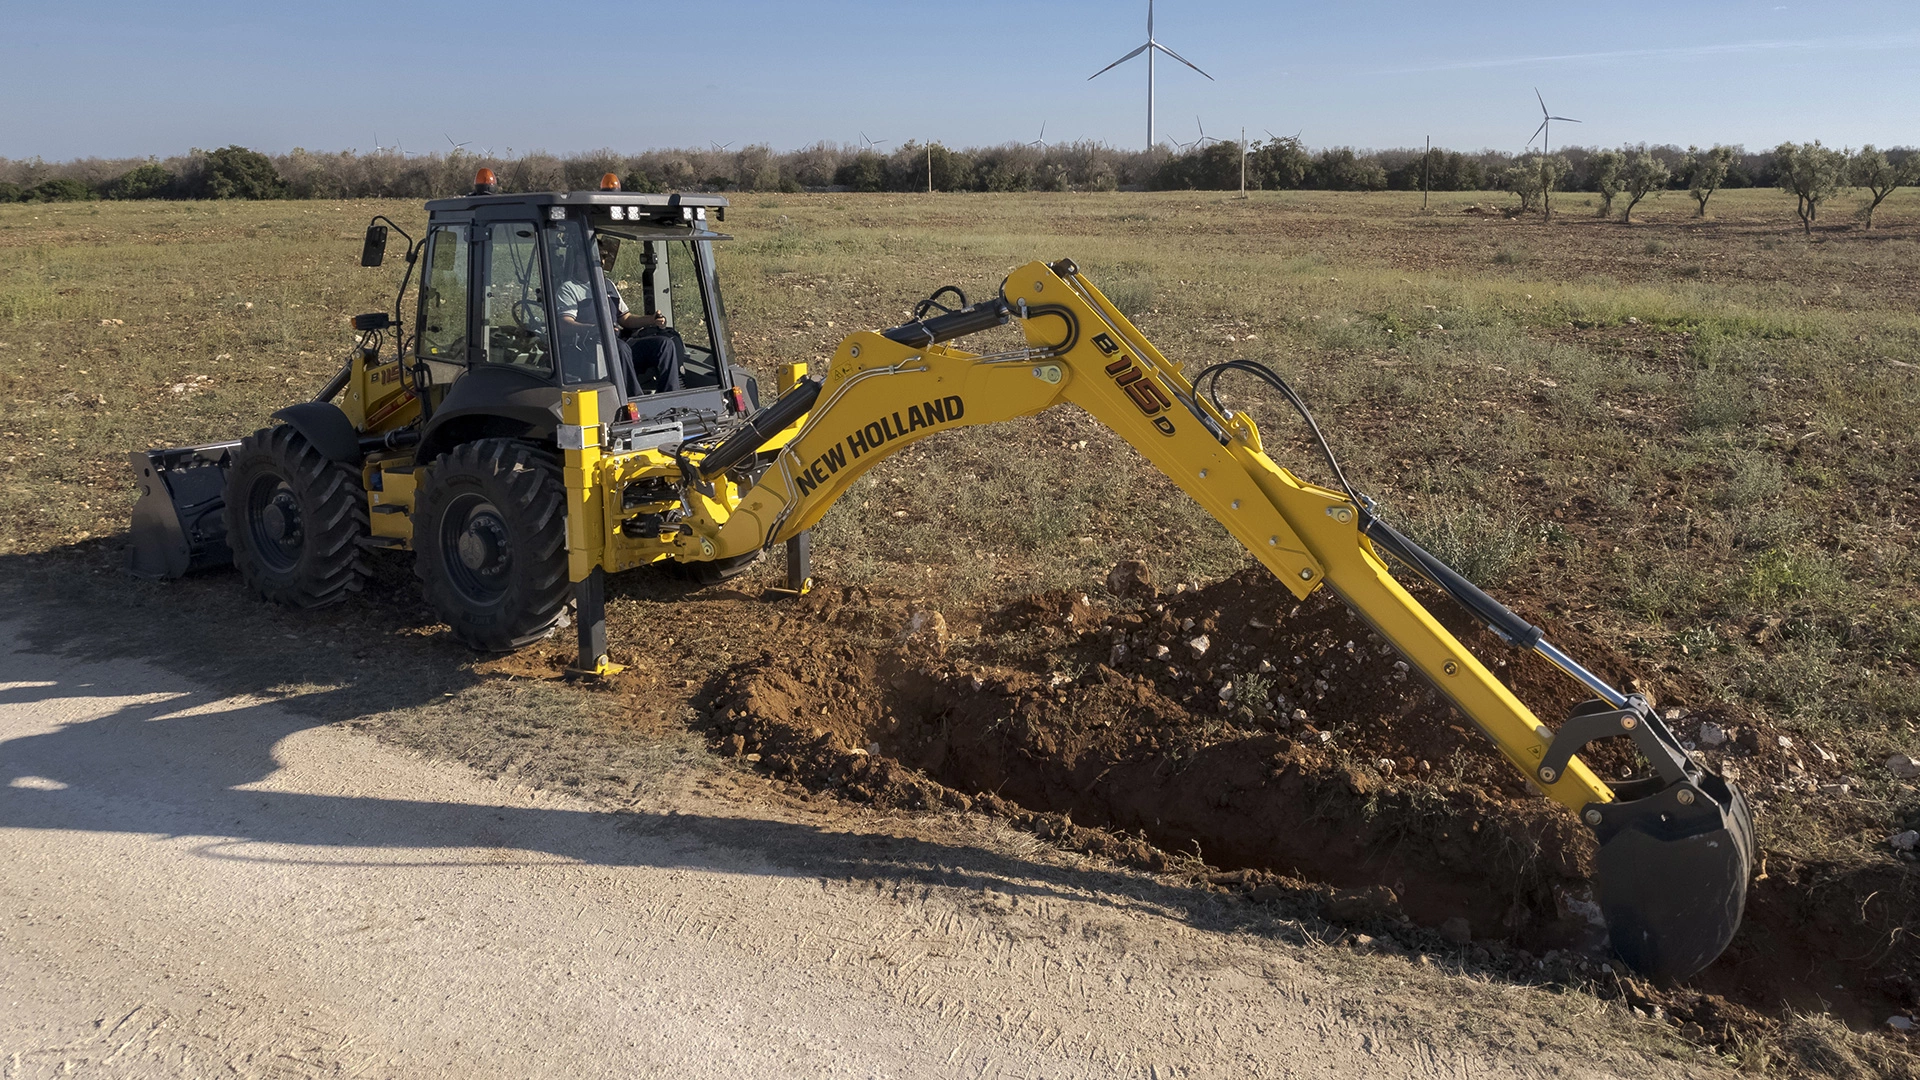 New Holland Backhoe in action, digging up soil, positioned amidst a field with wind turbines in the background.